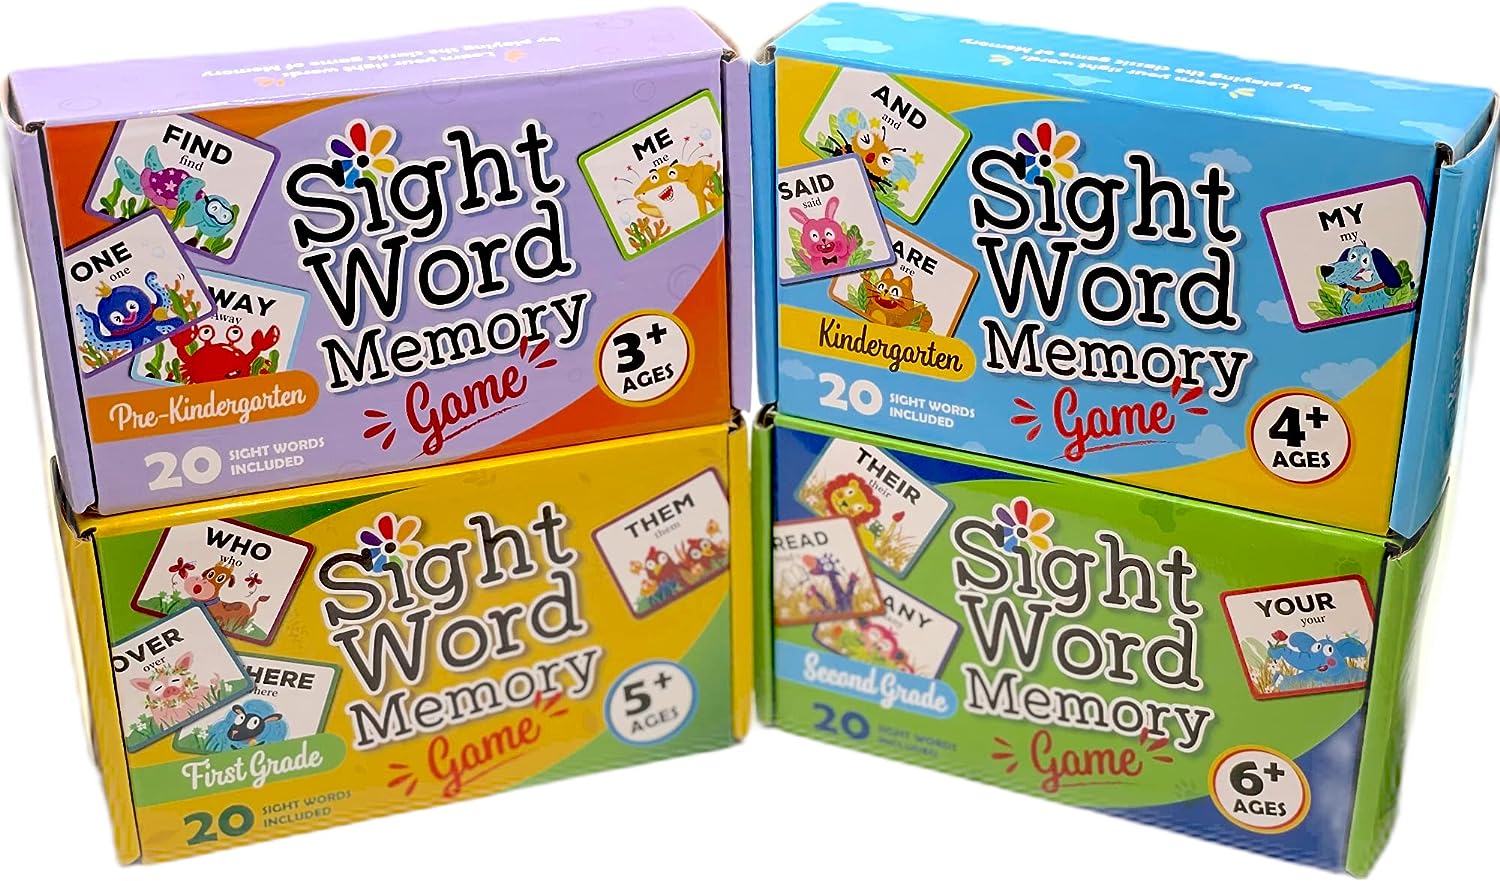 Urban Supply Co Sight Word Memory Game / Matching Game. Reading and Language Building for Grades Pre-Kindergarten Through Second Grade. Early Children's Educational Learn to Read (Kindergarten)